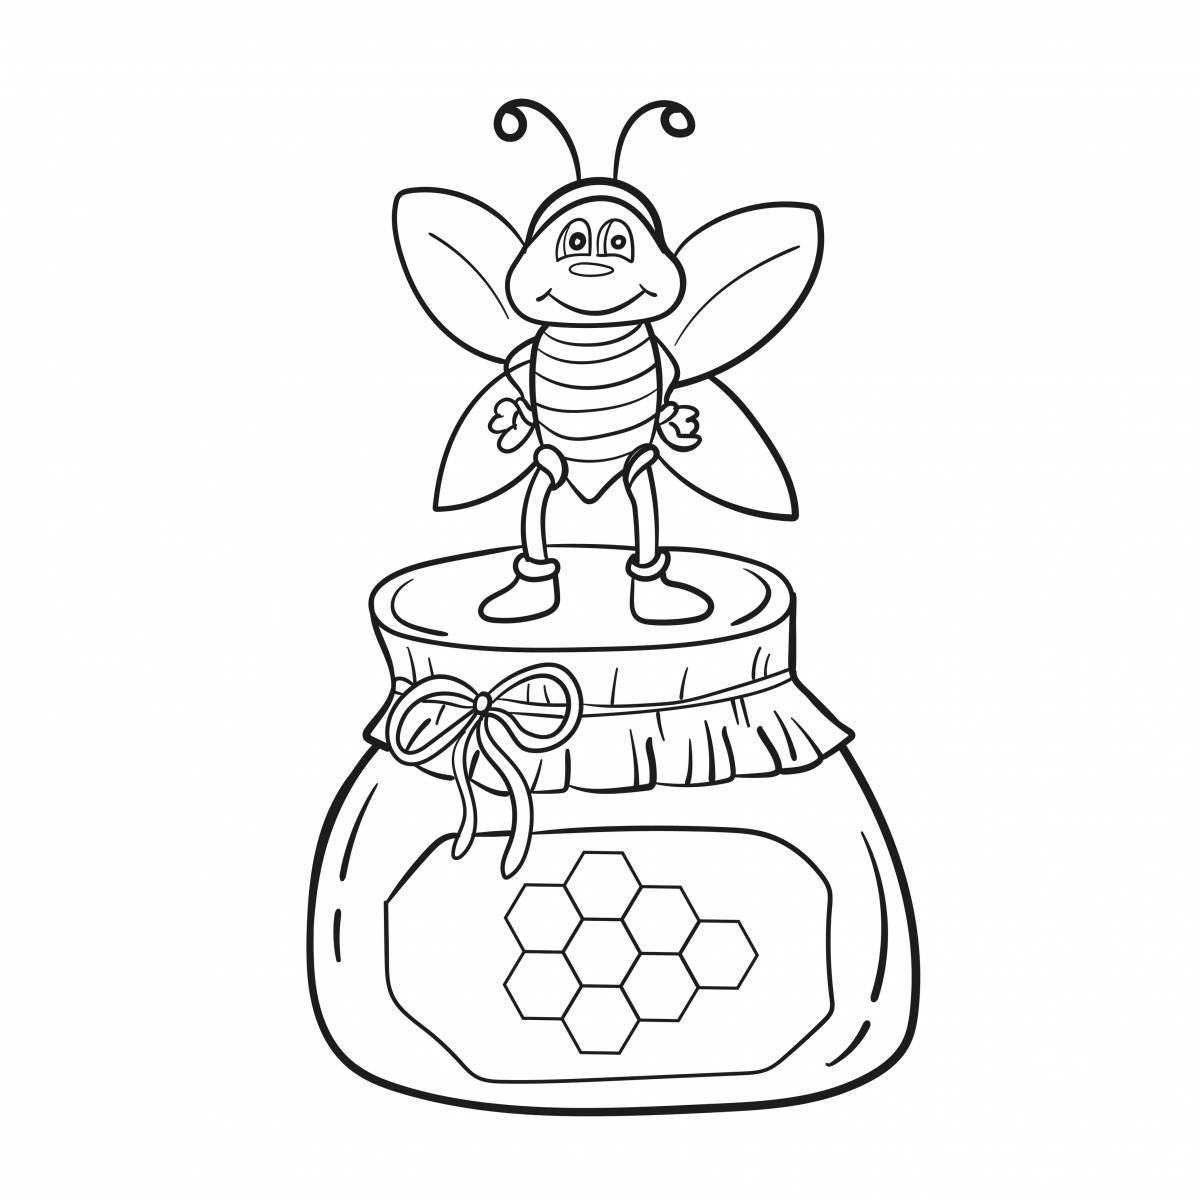 Bright honey coloring for kids